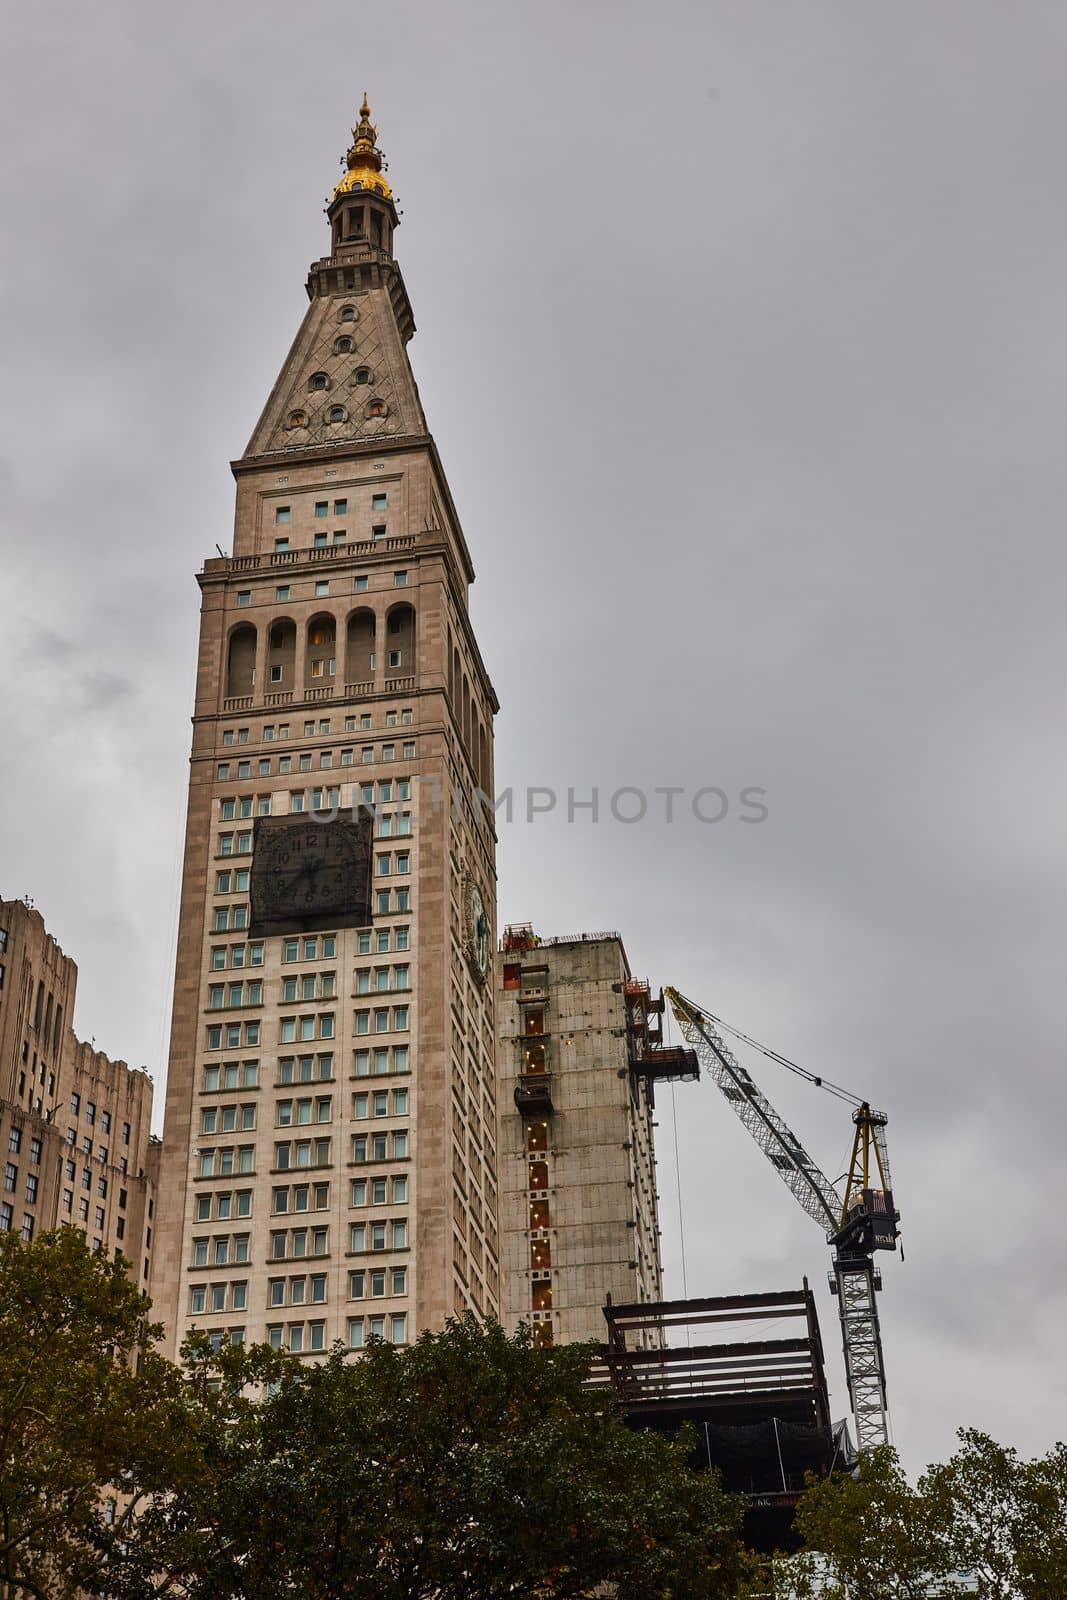 New York City building with front clock covered for construction by njproductions